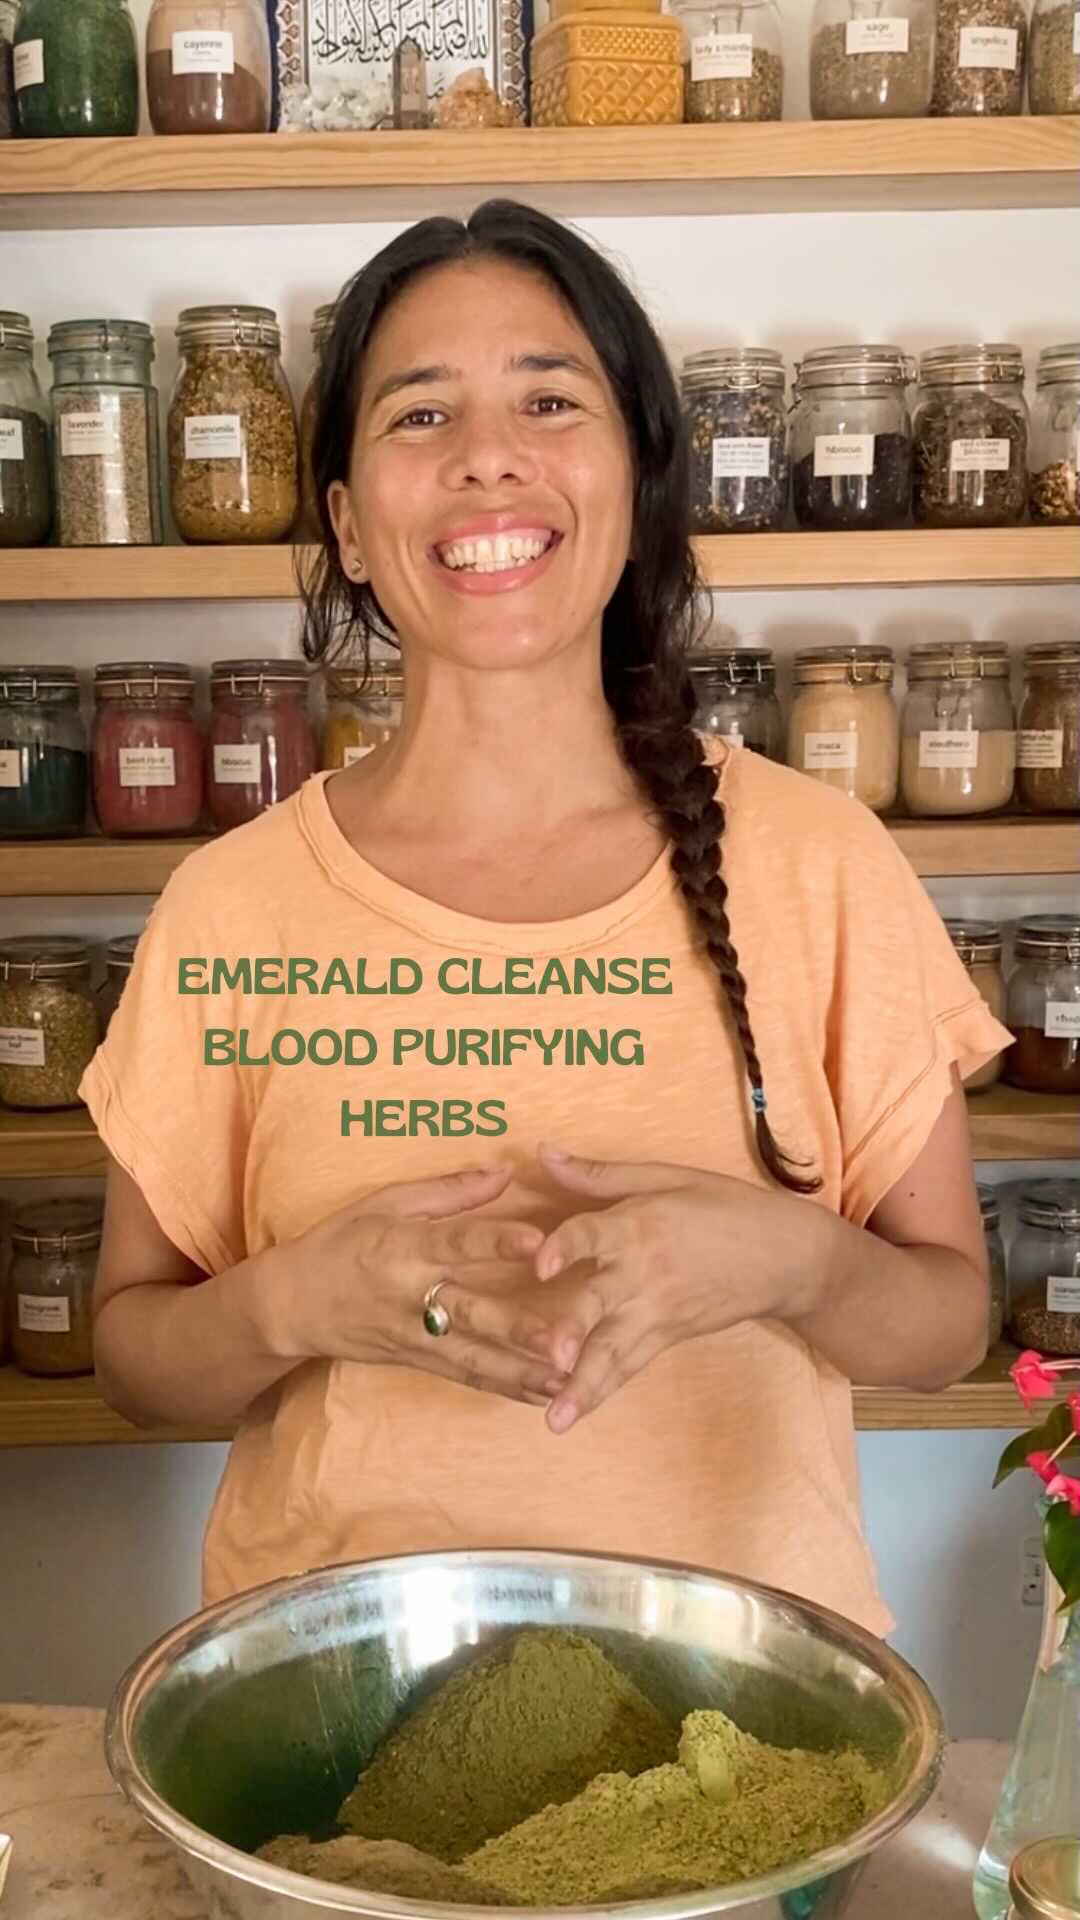 Emerald Cleanse  This blend contains: Chlorella and Spirulina: they detox your cells, packed with chlorophyl Plantain: it detoxes the lead out of your system Nettles: is a general blood cleanser packed with iron Moringa + Wheat Grass: highly nutritious, alkalizing Try the Emerald Cleanse if you have skin issues, feel tired, bloated, after consuming any type of toxic drugs, or simply to maintain your optimal health. Here is my recipe, save it, you’ll thank me later: 1 tsp Emerald Cleanse 1/2 cup of chopped pineapple 5 leaves of fresh (pepper)mint 1/4 tsp probiotic powder (optional) 1 cup cold water 1 tsp honey (optional) Blend on high and sip in bliss Share this with a friend you think might need this info.  Comment bellow if the Emerald Cleanse has been done the job in your life.
.
.
.
.
#emeraldcleanse #chlorella #spirulina #moringa #greendetox #bloodcleansingherbs #alteratives #bloodpurifyingherbs #nettle #greenpowder #alkalinediet #alkalinesupplement #vitality #herbalist #herbalism #lightbody #lightbodyactivation